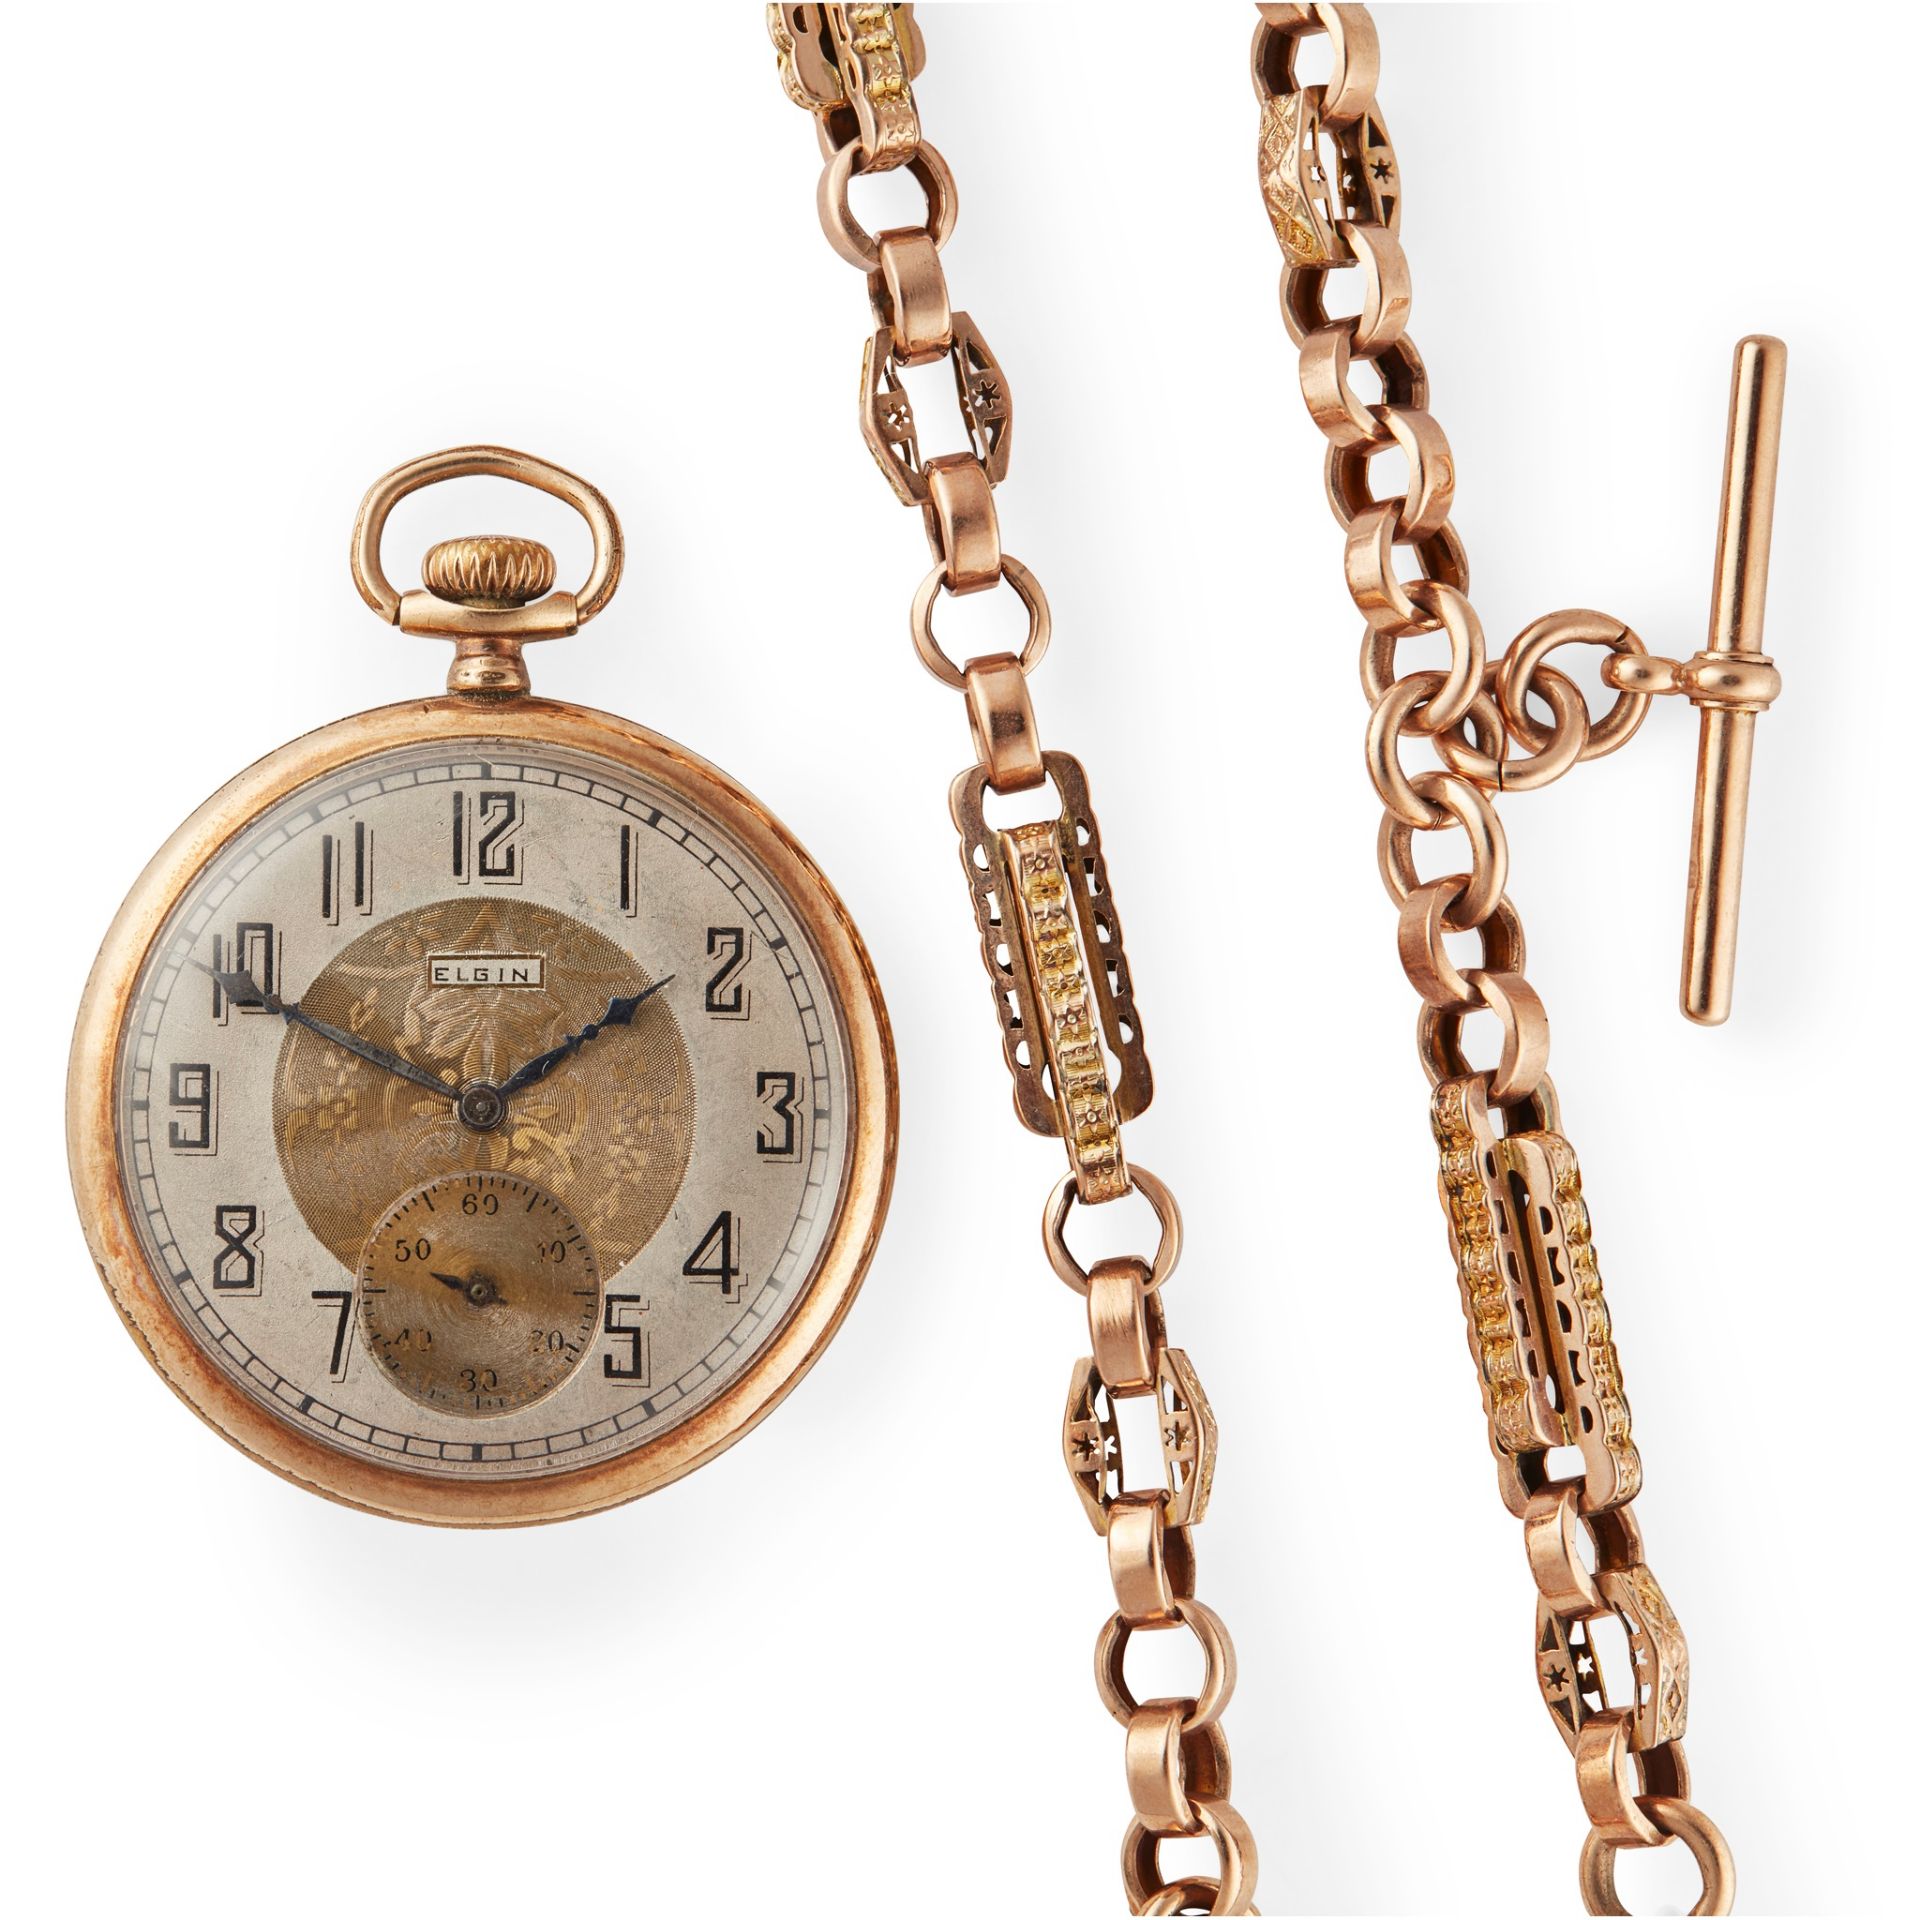 Elgin: a gold plated pocket watch and chain